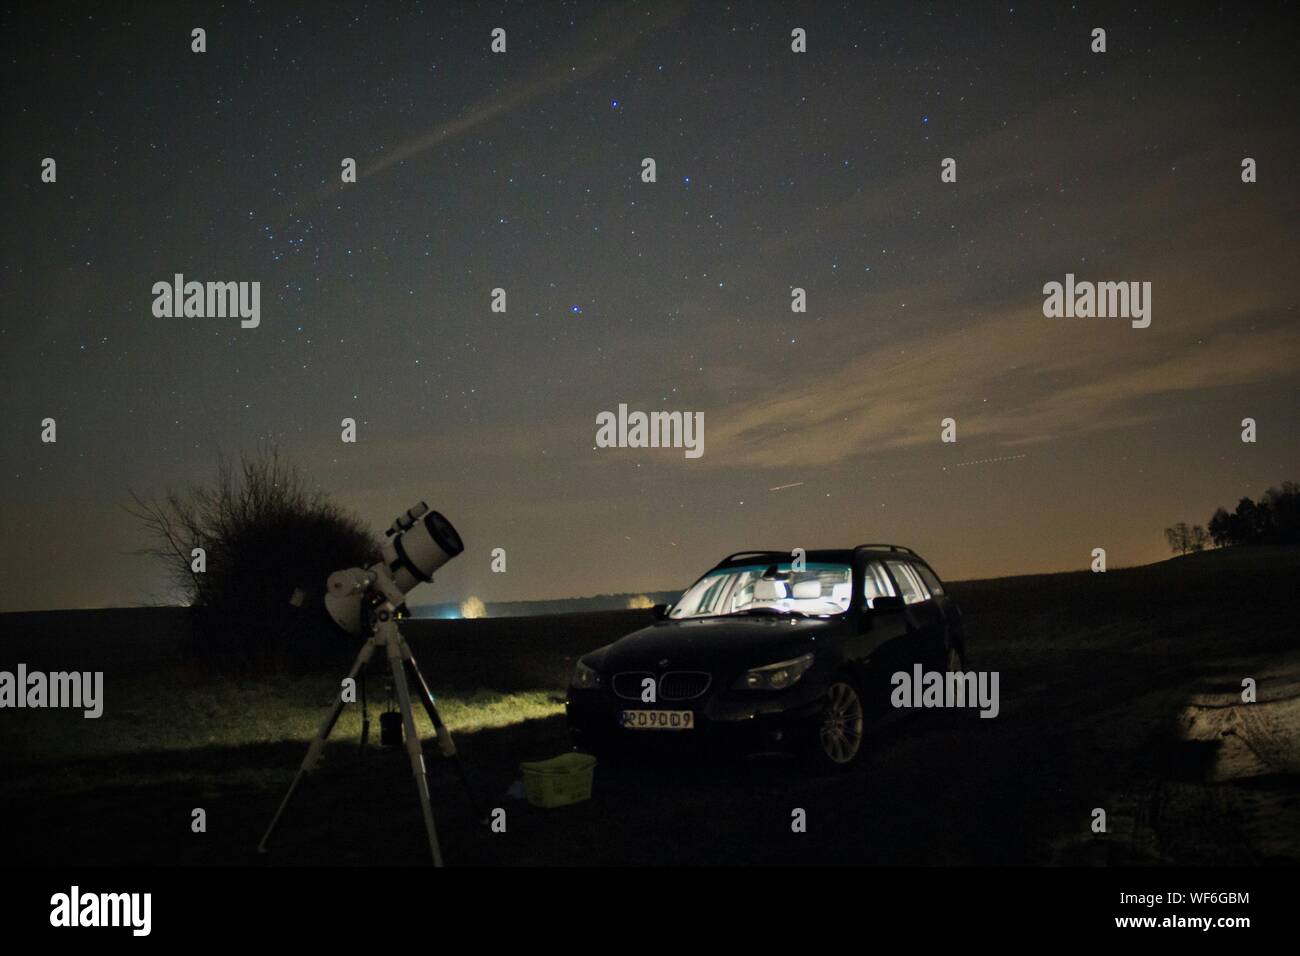 Astrophotography Setup And Car On Landscape Against Night Sky Stock Photo